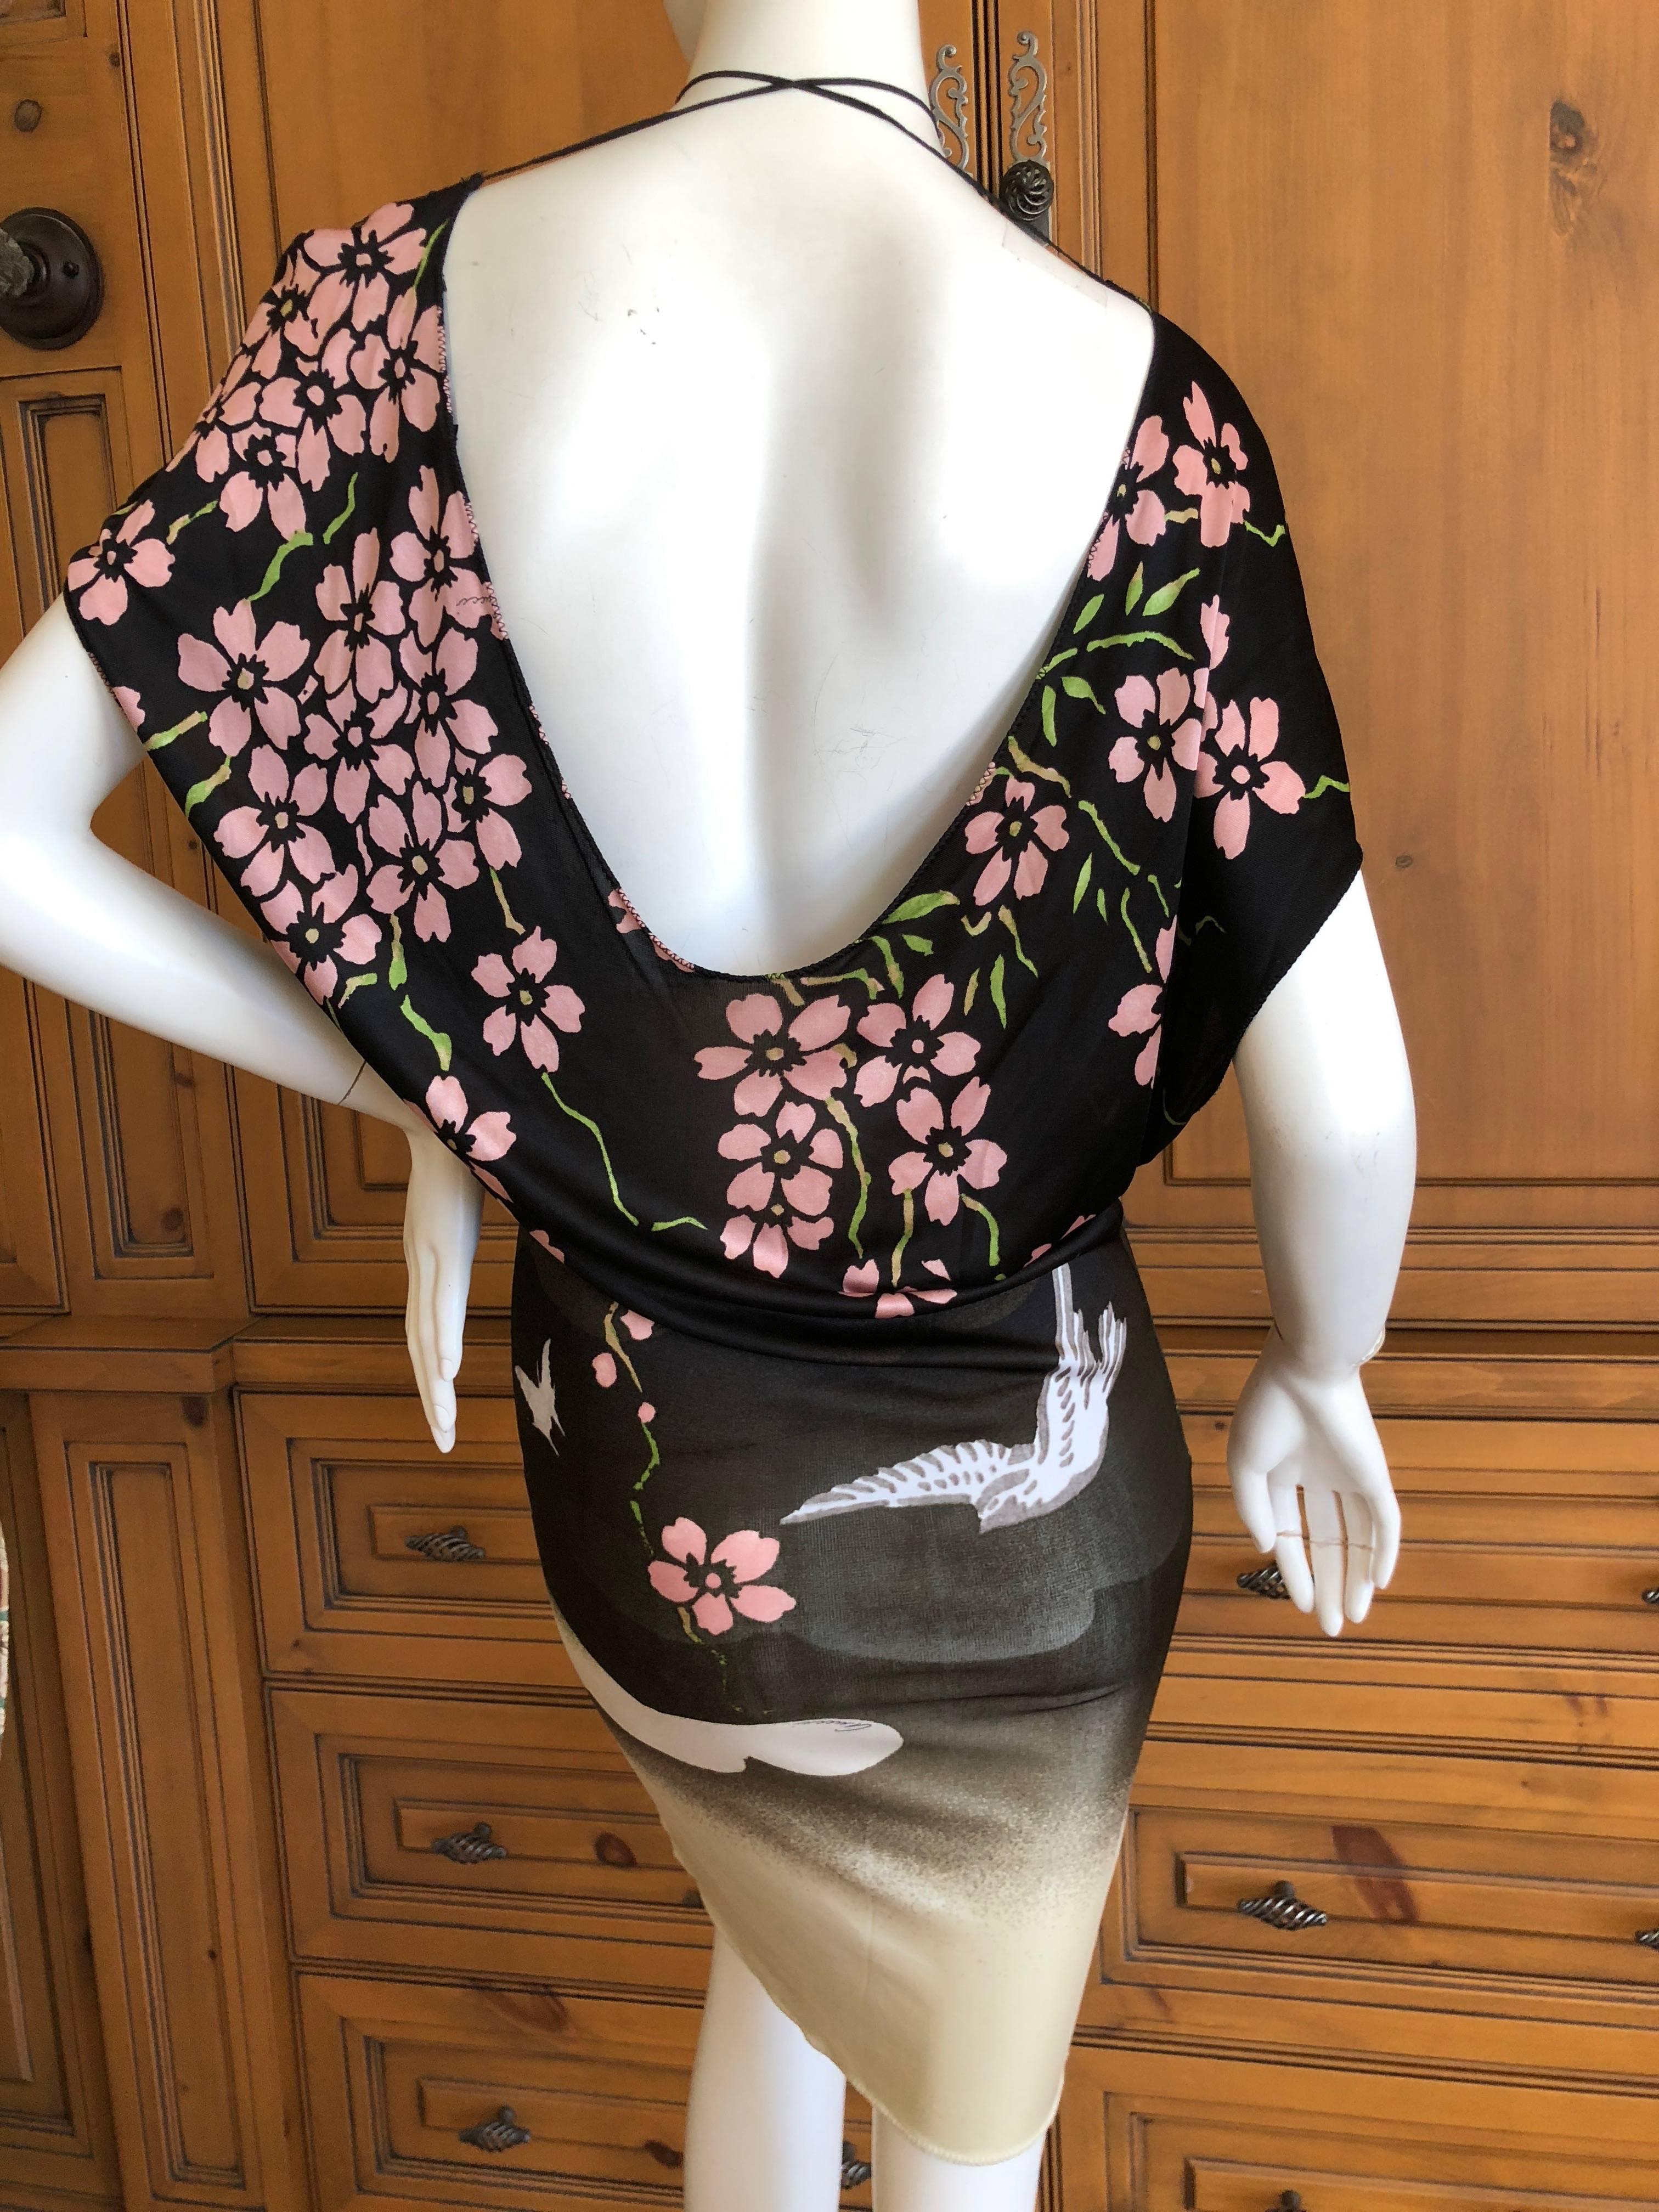 Gucci 2003 Tom Ford Japonaise Dogwood Blossom Mini Dress In Good Condition For Sale In Cloverdale, CA